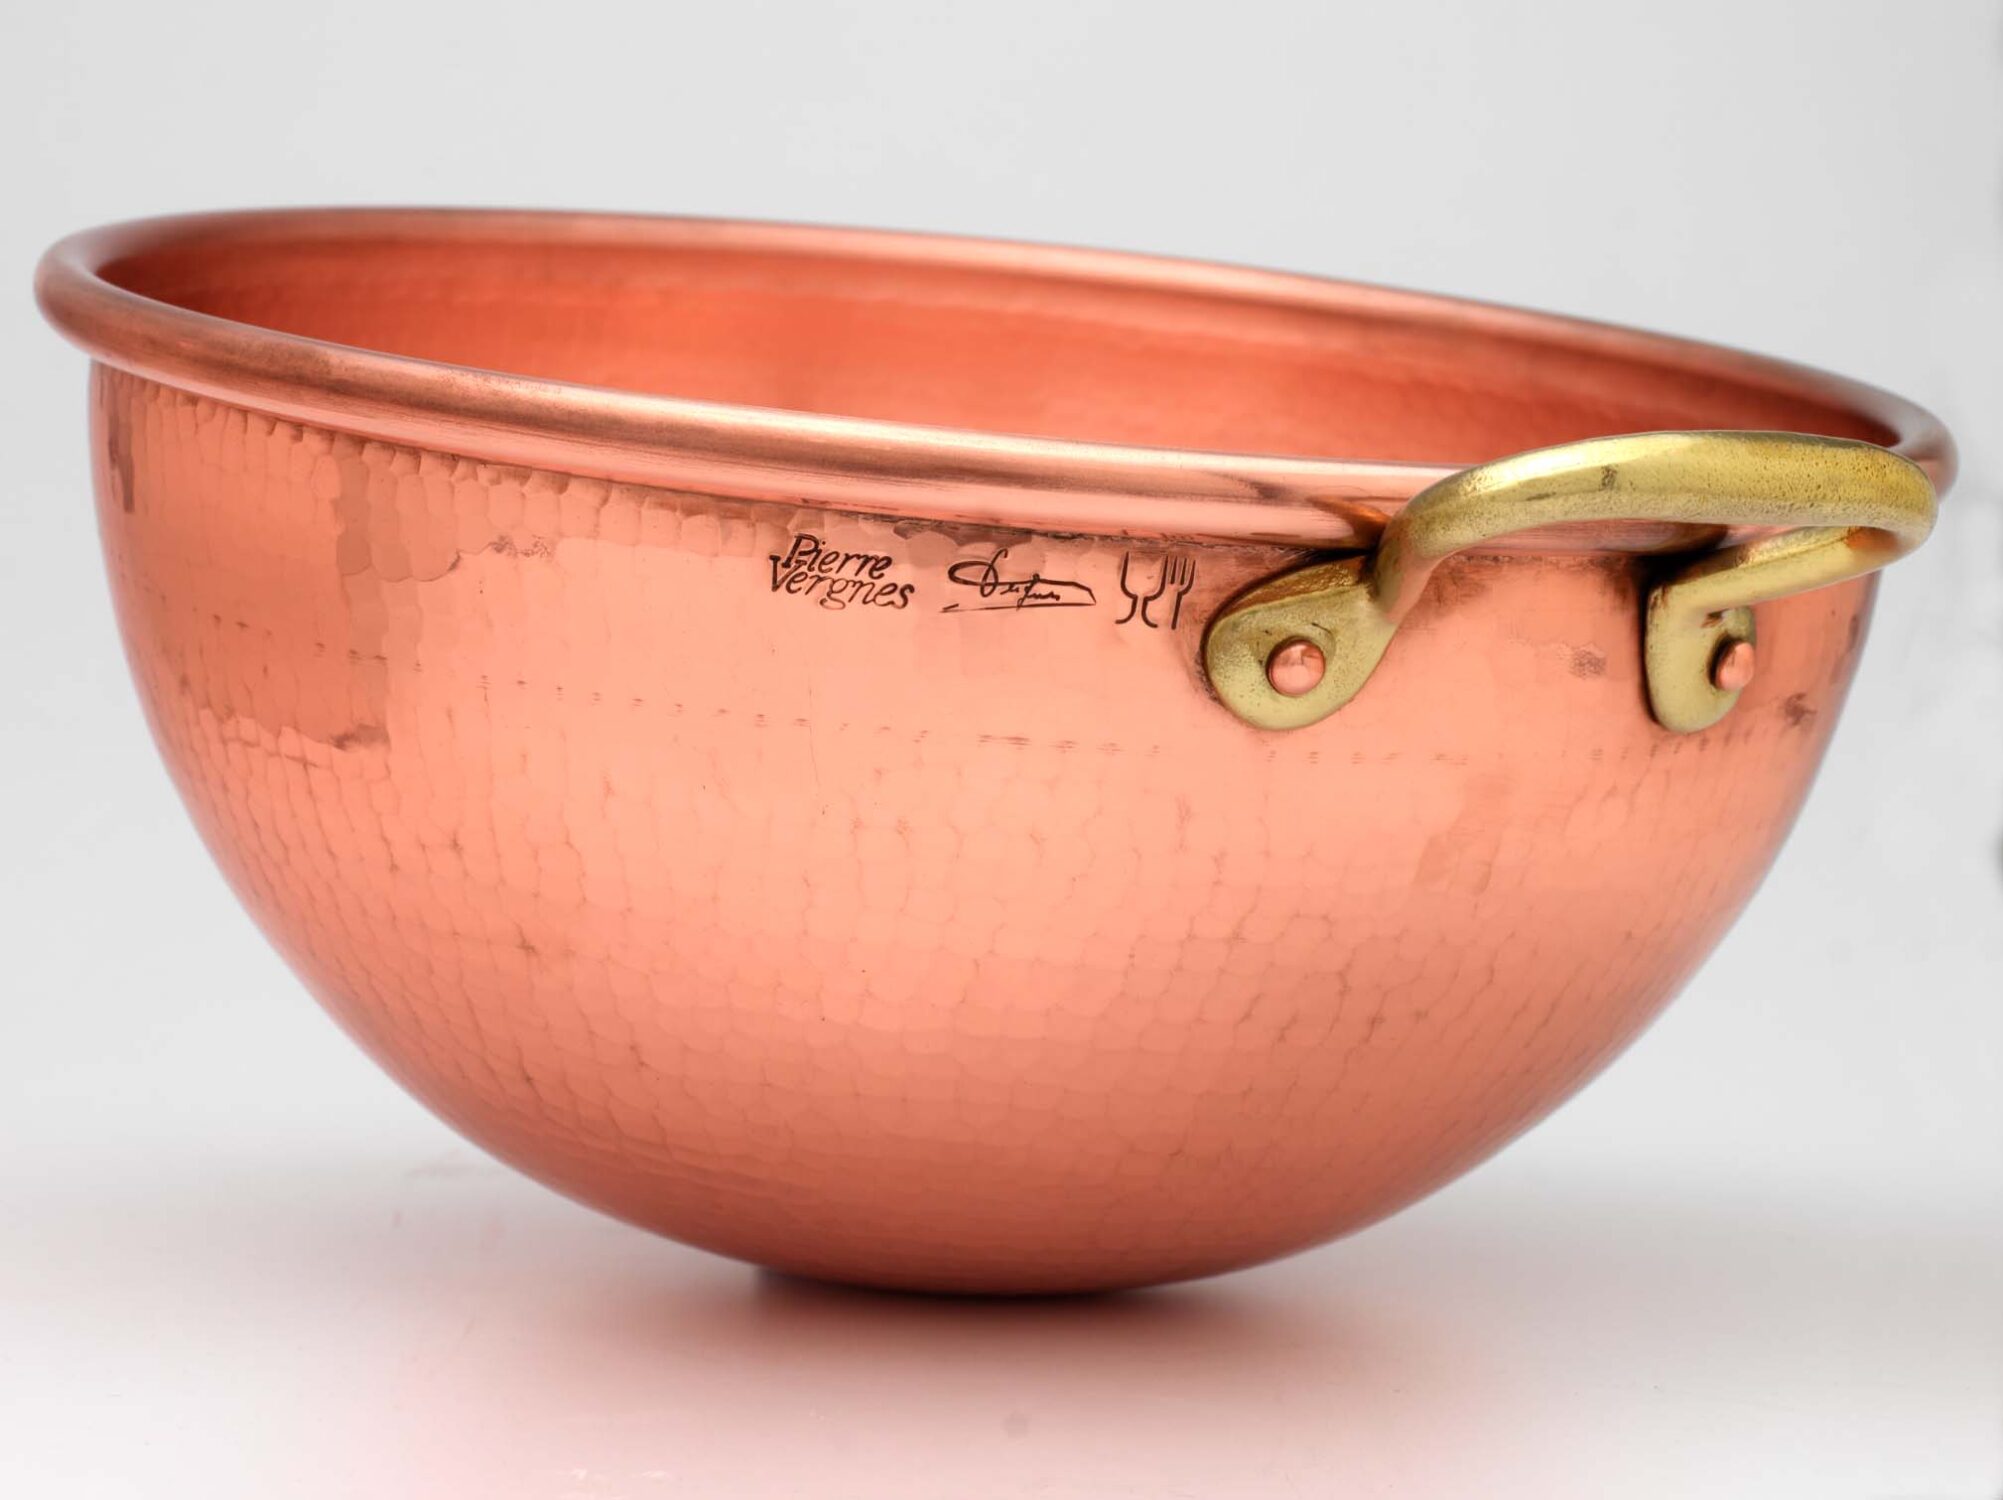 Copper Mixing Bowl - One Brass Handle - Hammered